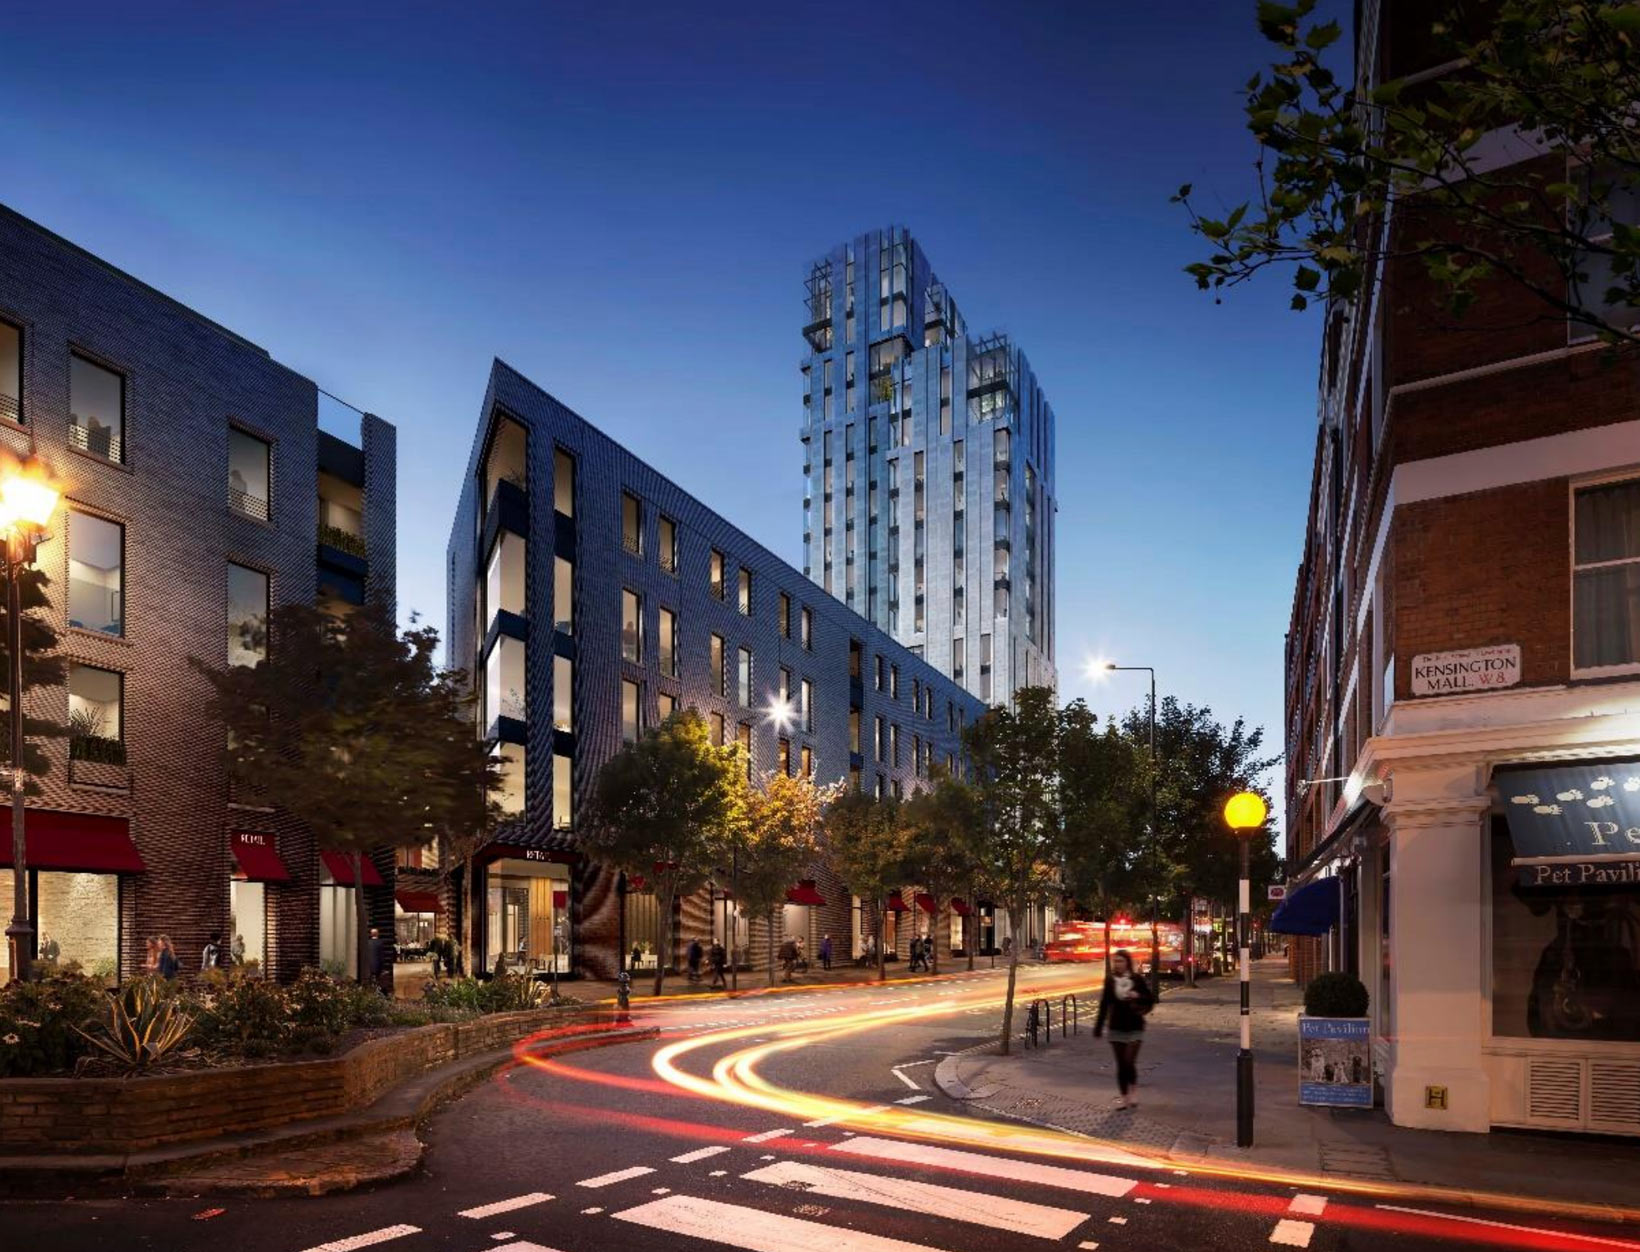 Newcombe House site in Notting Hill is granted planning permission